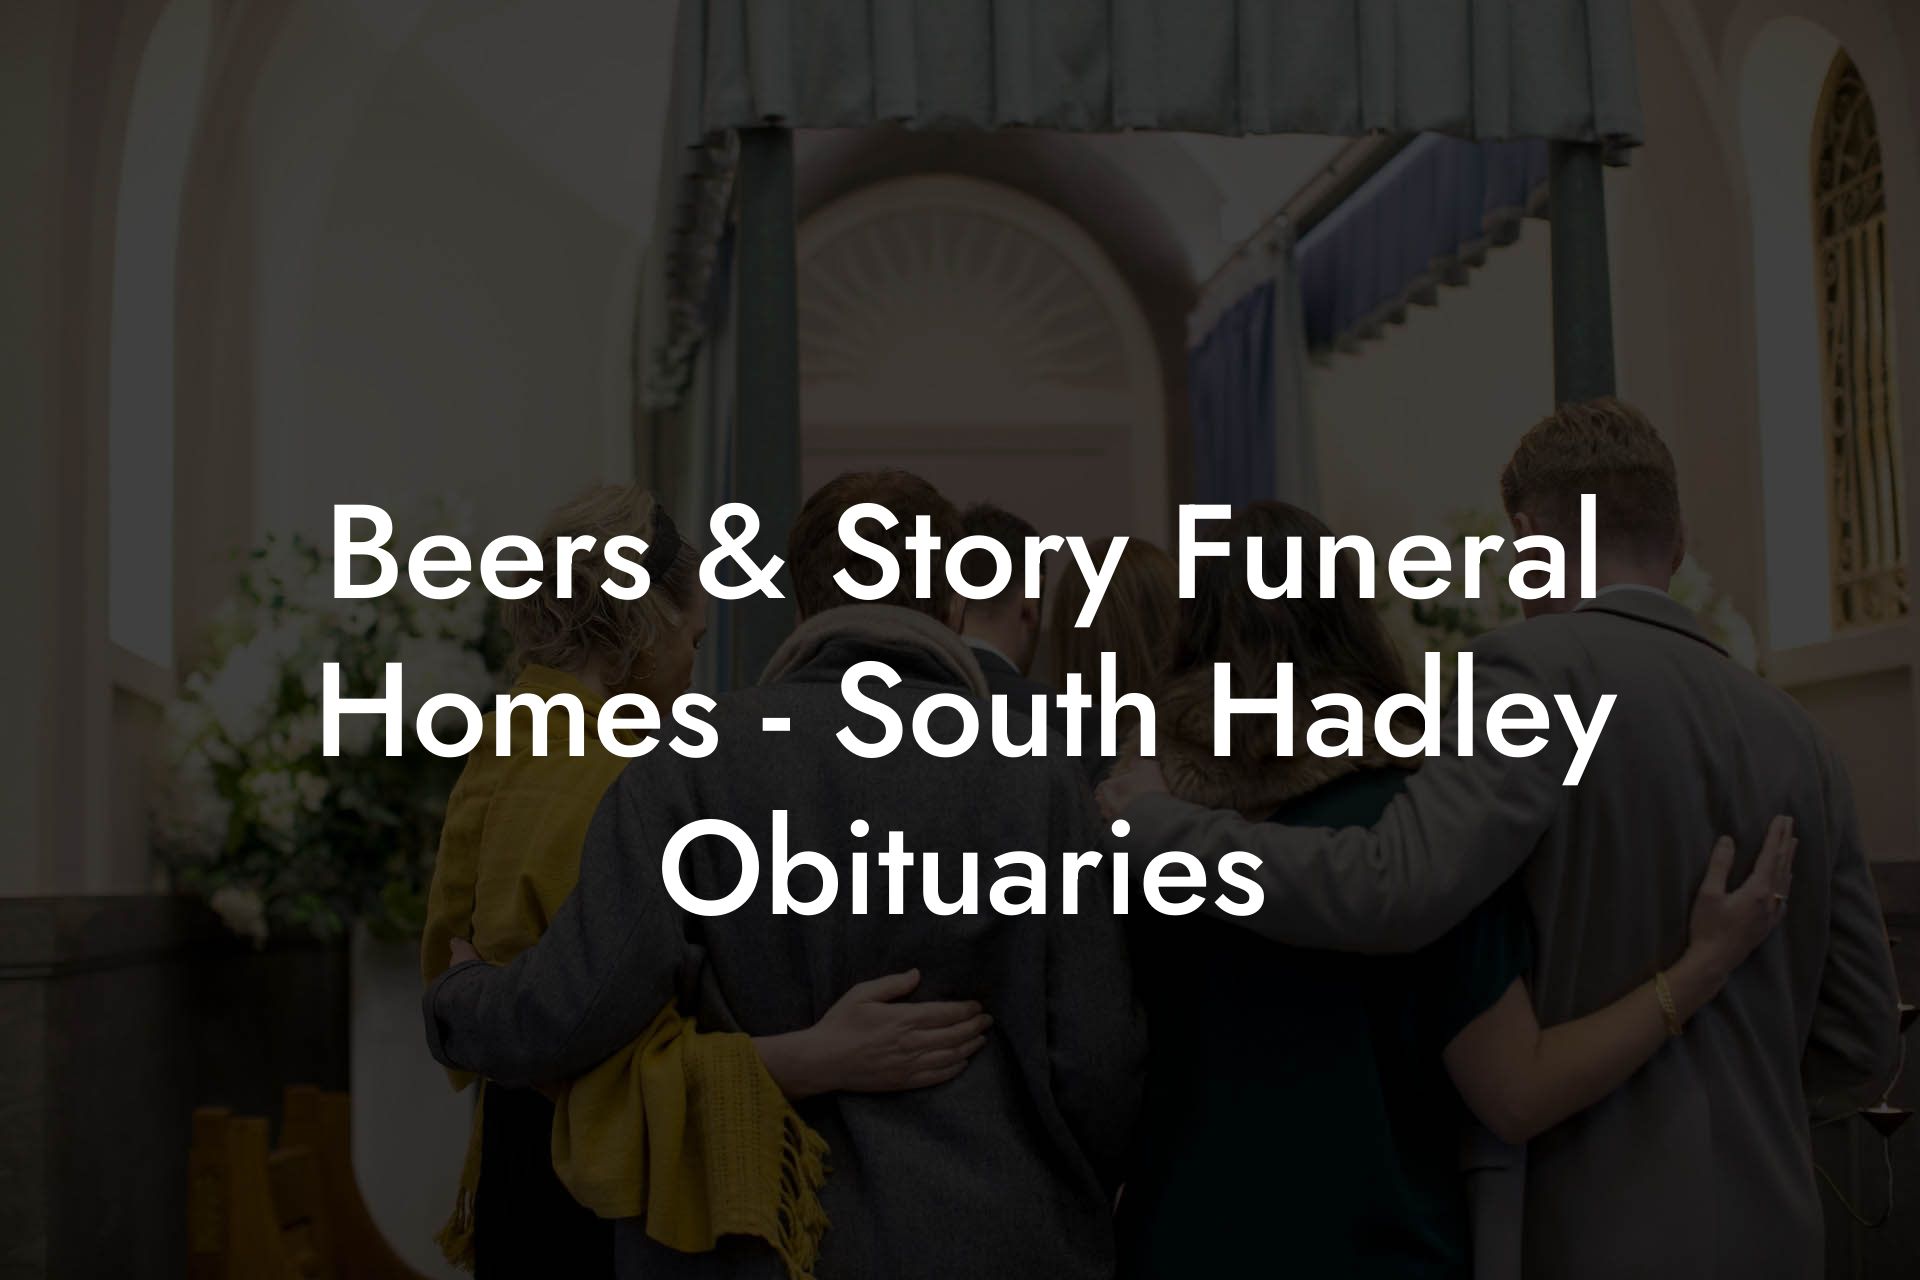 Beers & Story Funeral Homes - South Hadley Obituaries